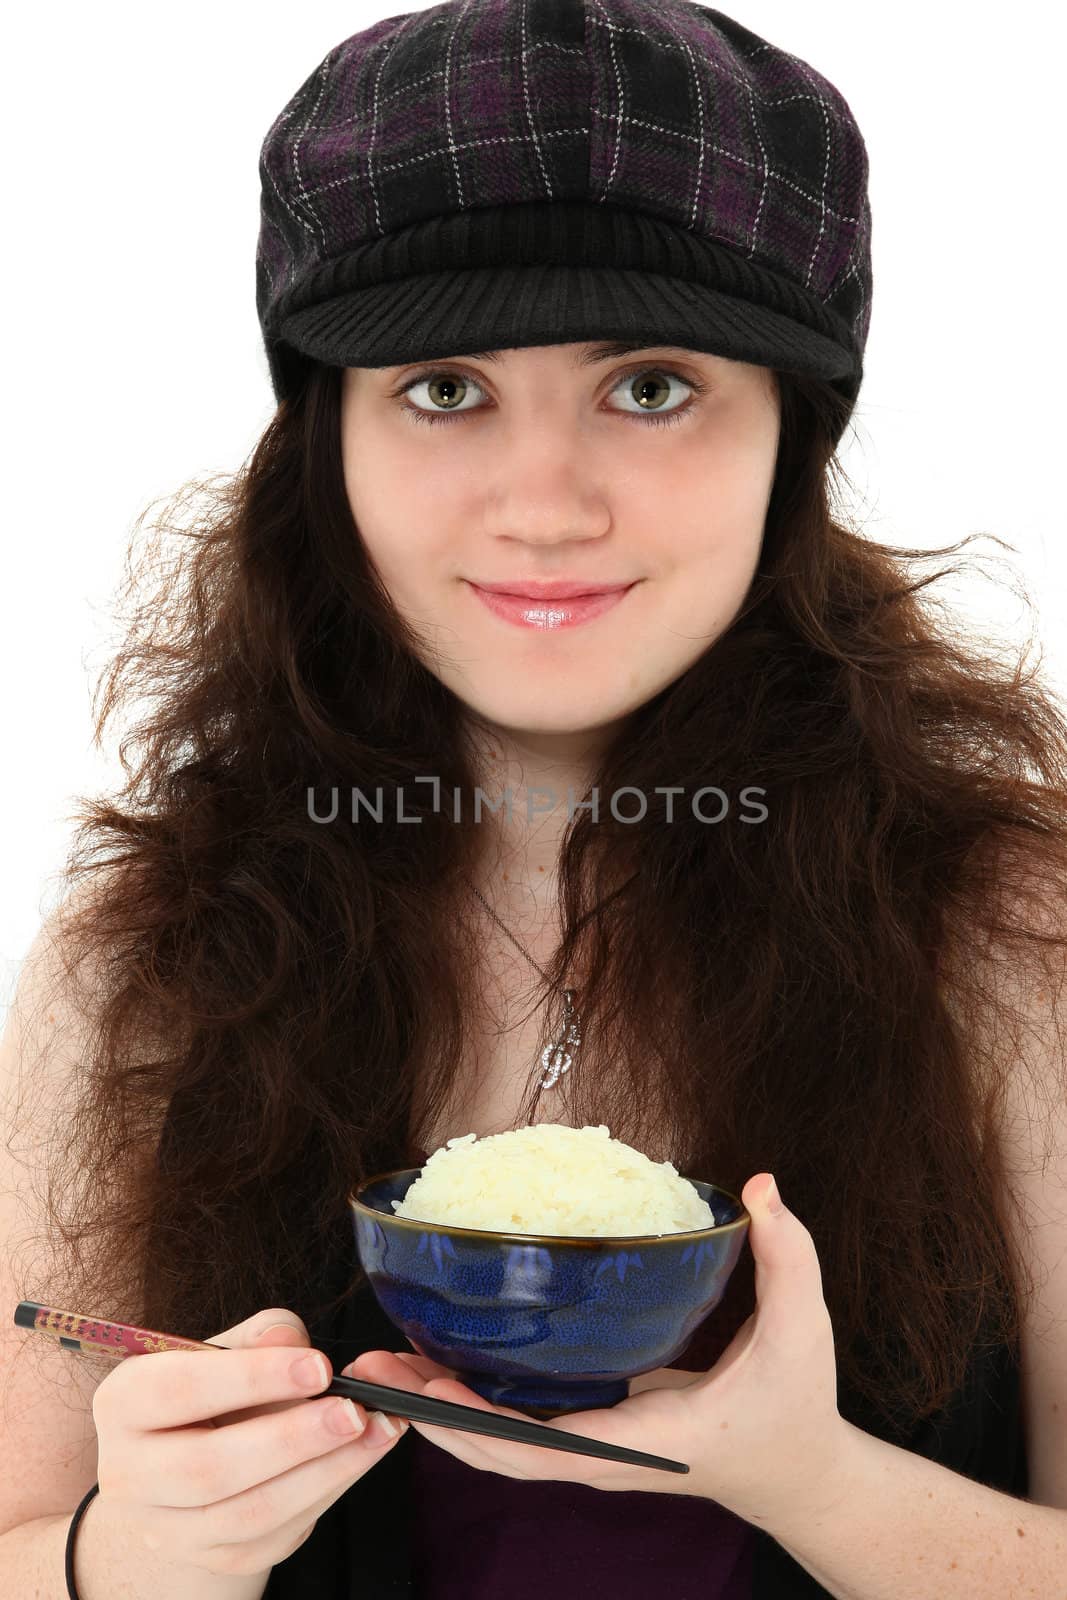 Attractive 18 year old young woman in hat eating bowl of rice with chopsticks over white.